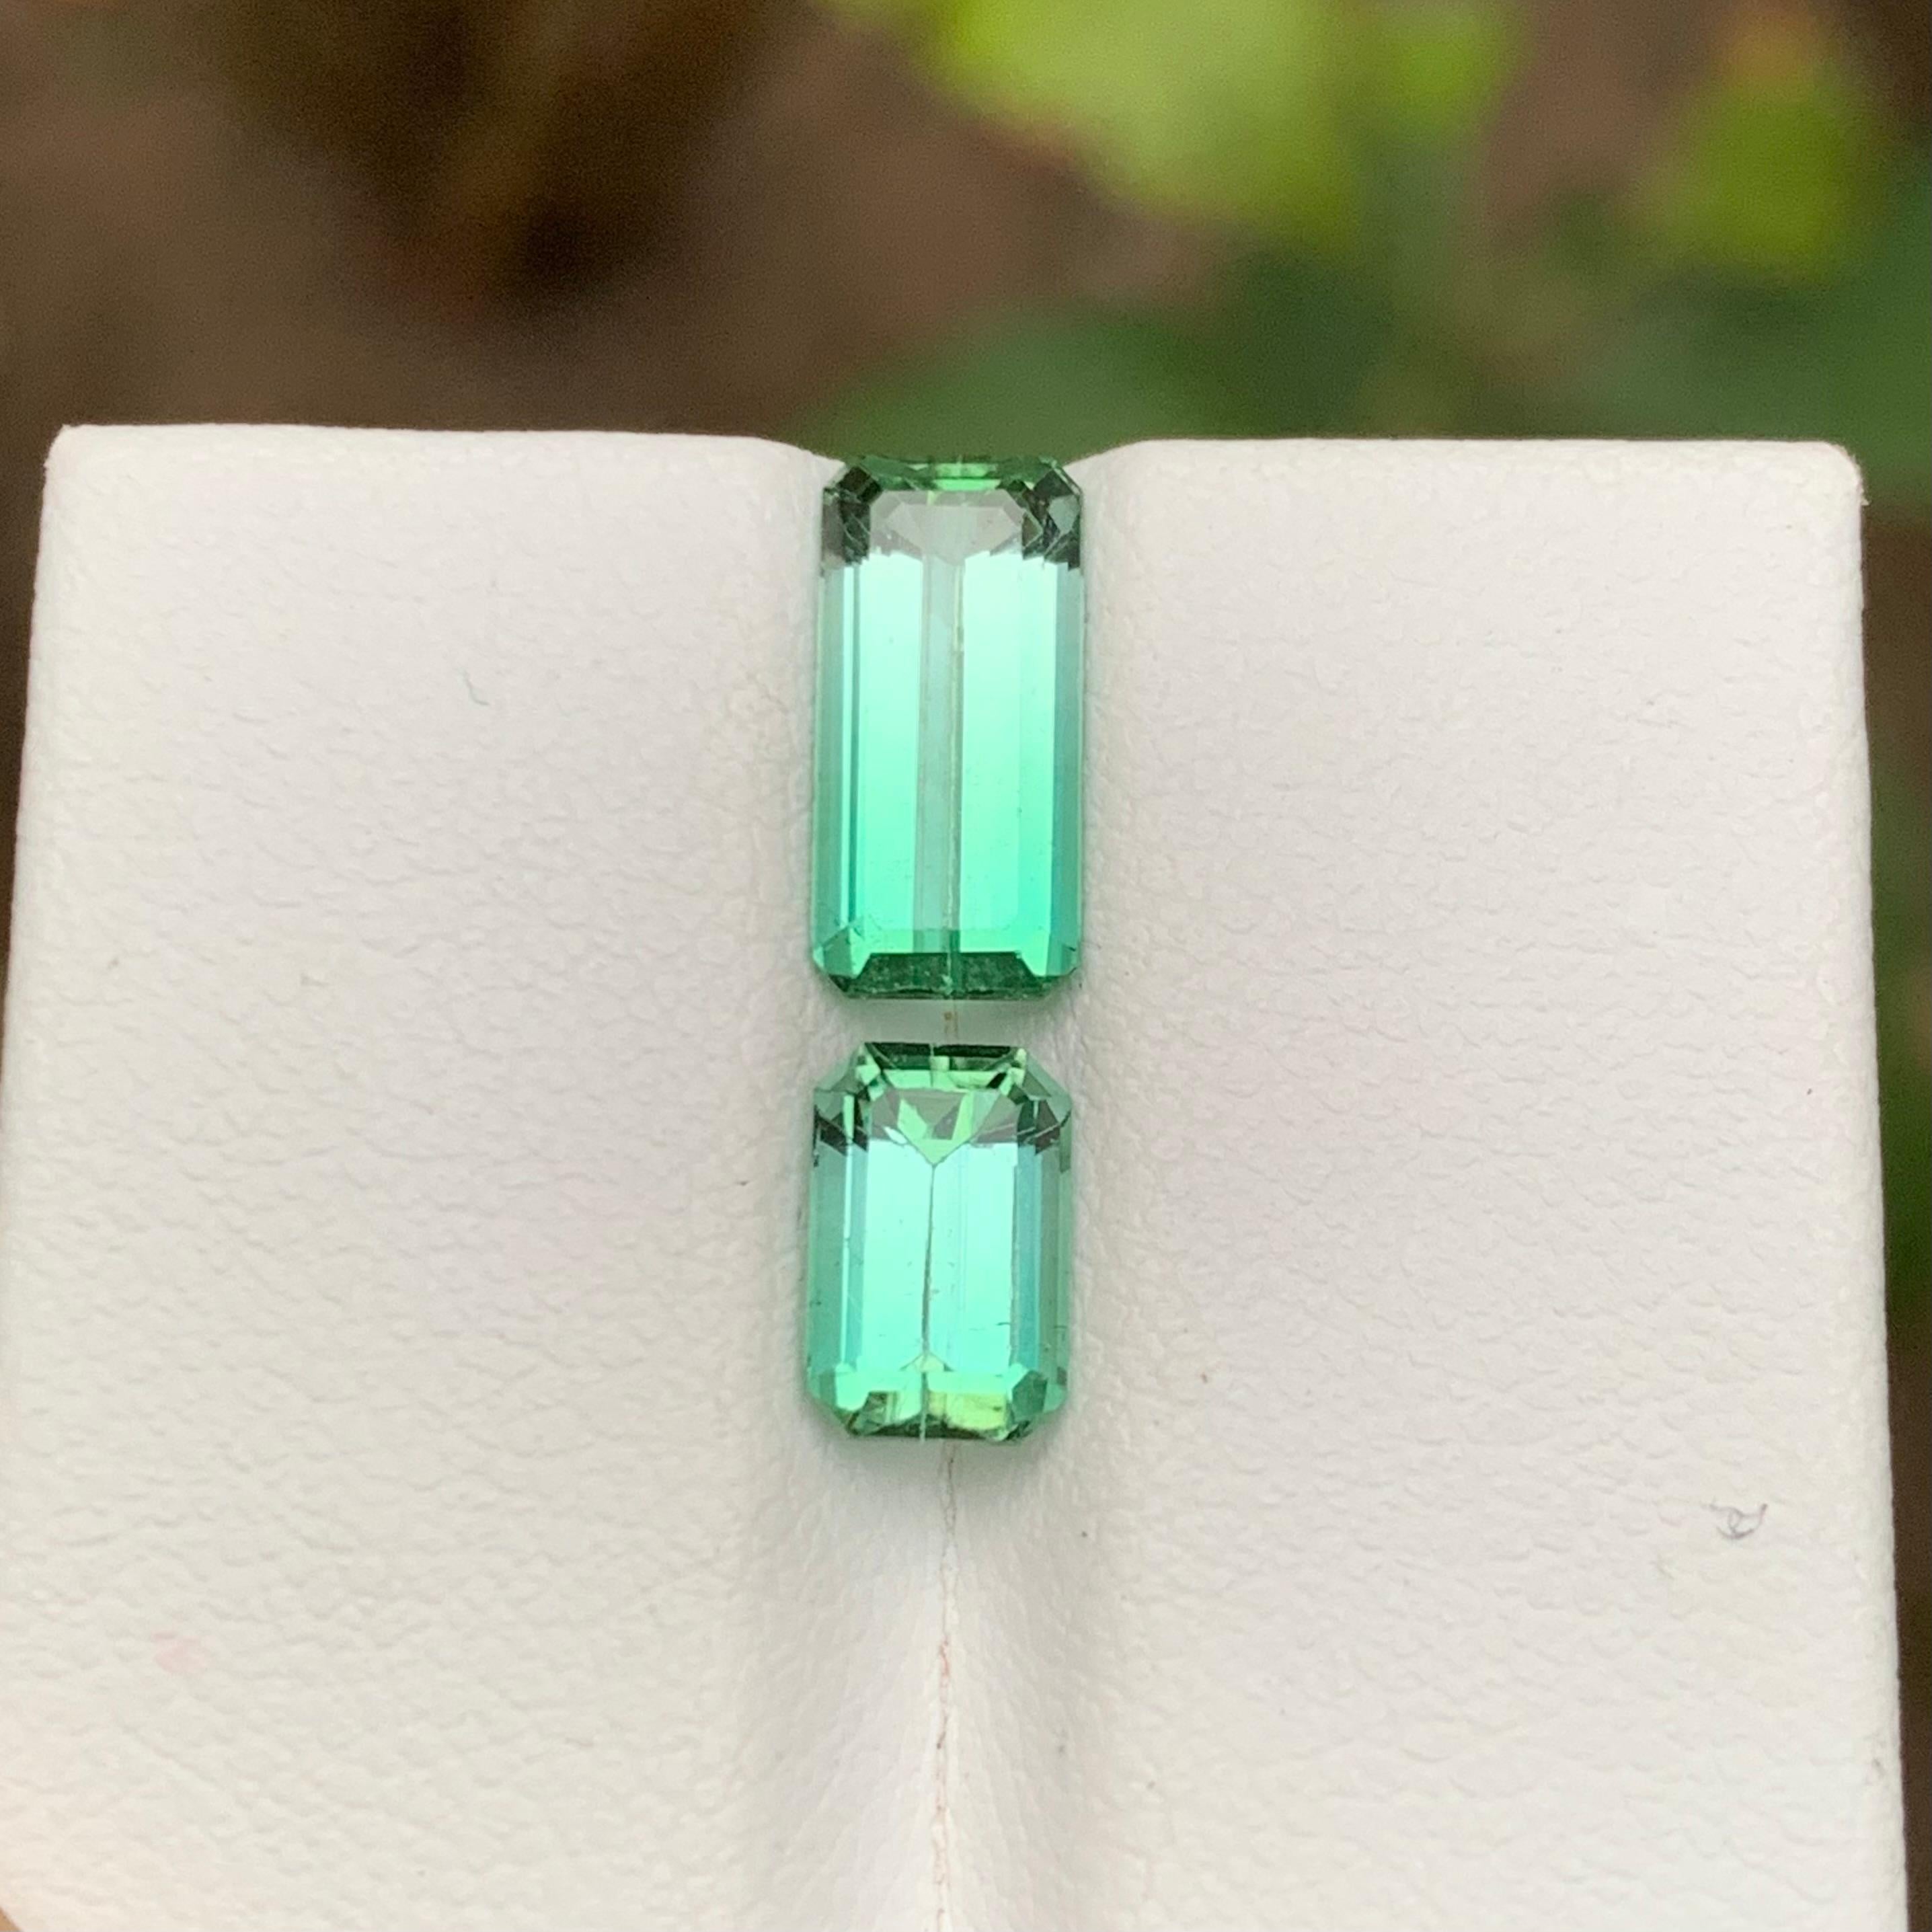 GEMSTONE TYPE: Tourmaline
PIECE(S): 2
WEIGHT: 3.55 Carats
SHAPE: Emerald
SIZE (MM): 
2.20 Carat: 11.07 x 5.23 x 4.07
1.35 Carat: 7.69 x 4.99 x 4.15
COLOR: Neon Bluish Green
CLARITY: Slightly Included 
TREATMENT: None
ORIGIN: Afghanistan
CERTIFICATE: